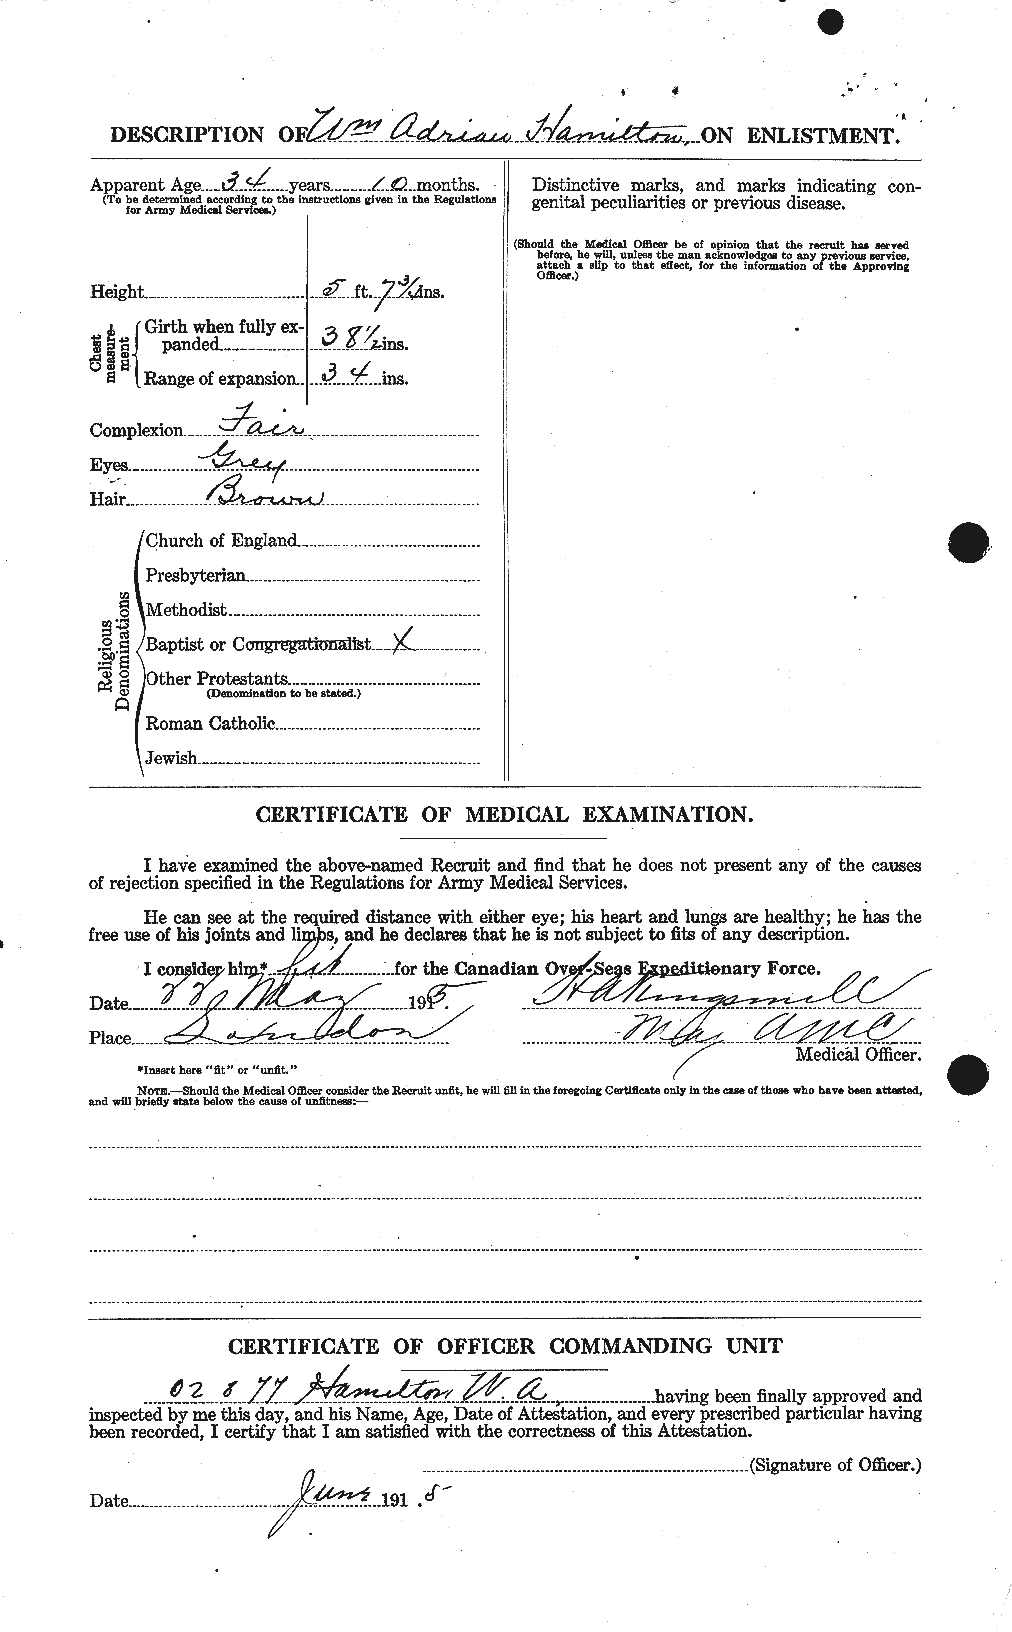 Personnel Records of the First World War - CEF 374872b